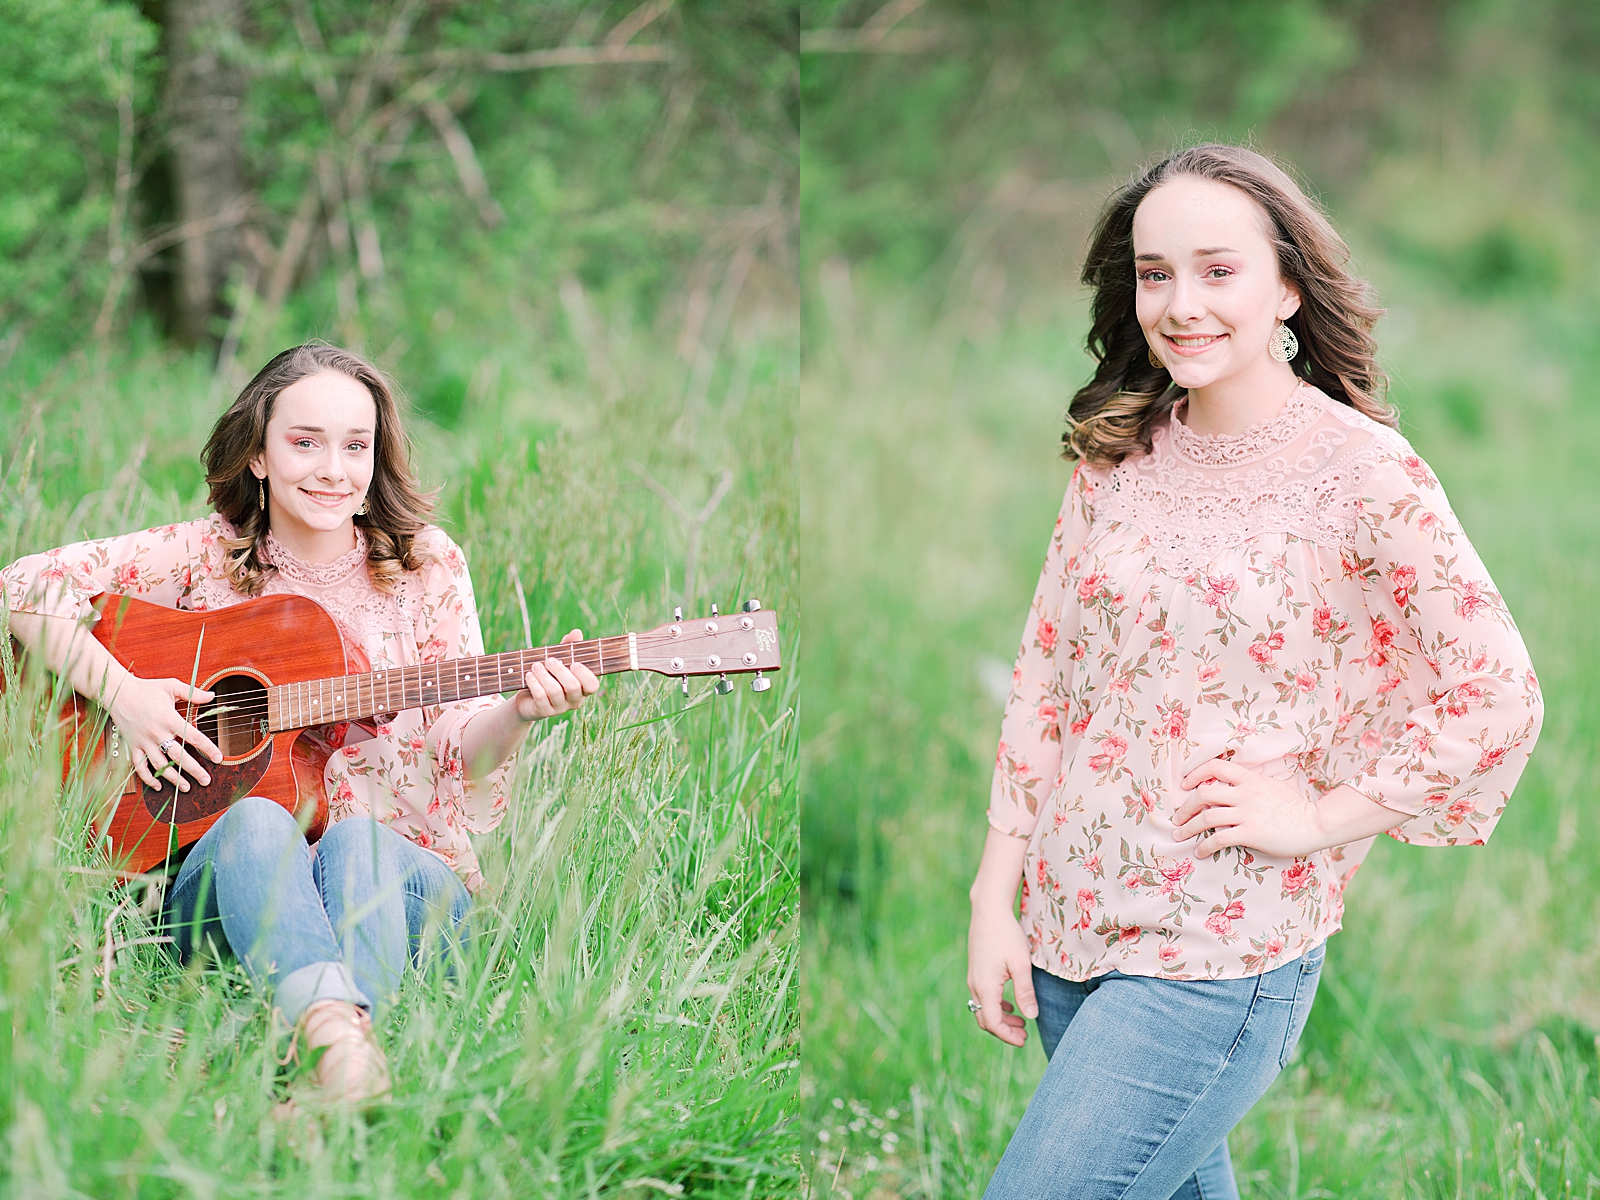 High School Senior Session Girl in pink shirt sitting in grass playing guitar and smiling at camera Photos